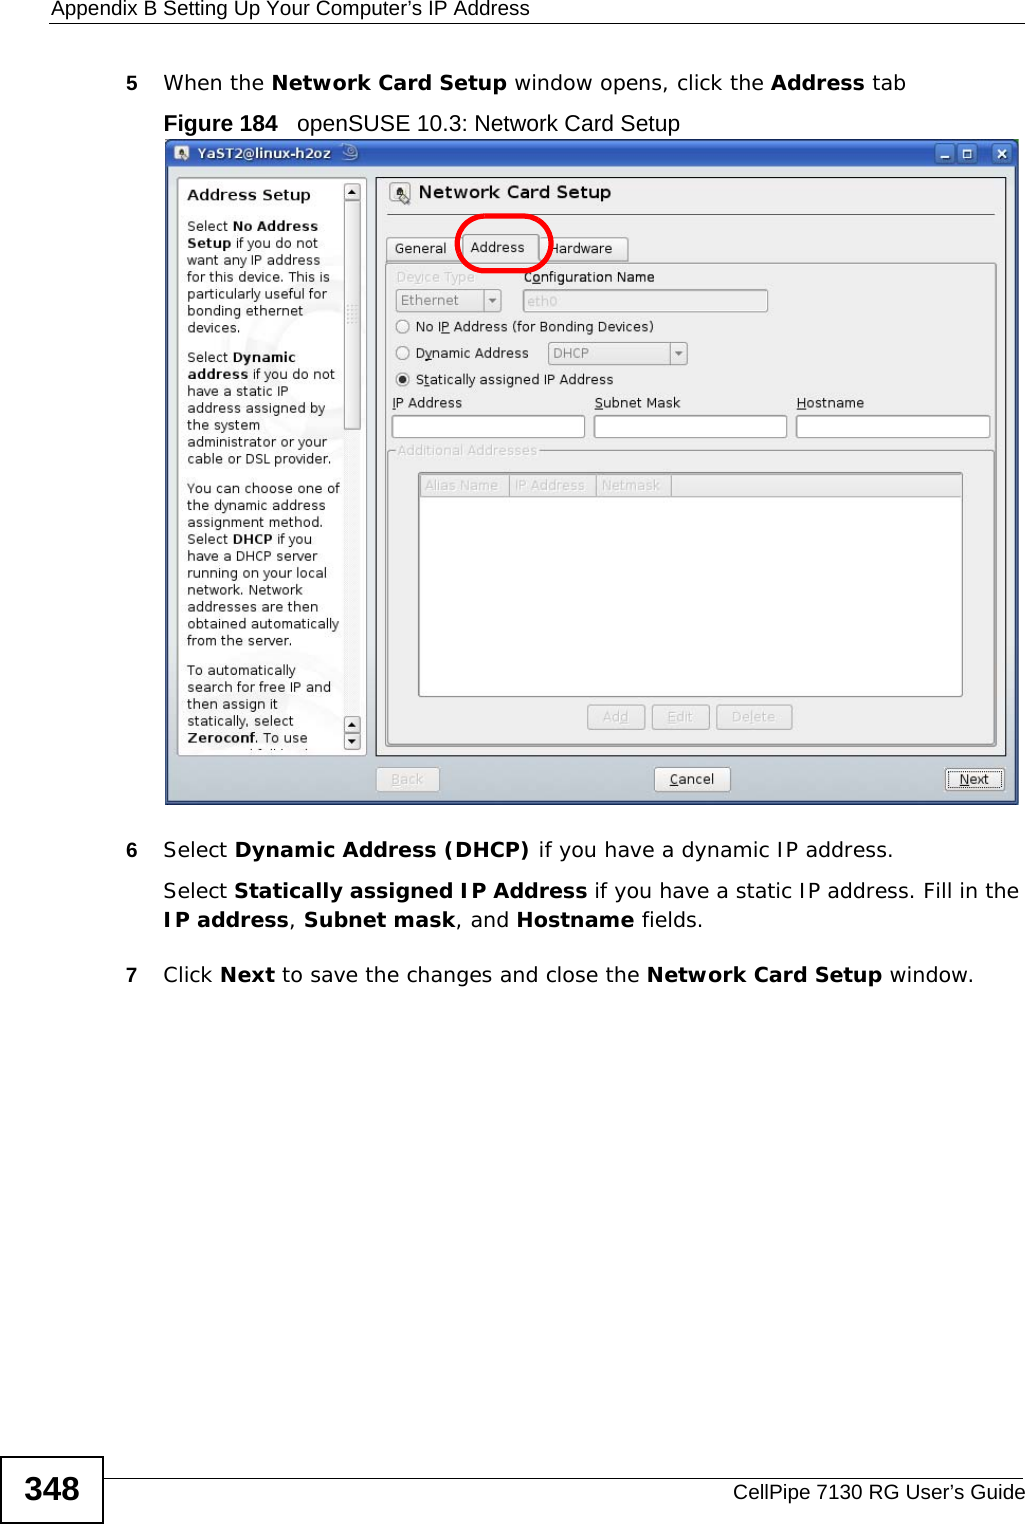 Appendix B Setting Up Your Computer’s IP AddressCellPipe 7130 RG User’s Guide3485When the Network Card Setup window opens, click the Address tabFigure 184   openSUSE 10.3: Network Card Setup6Select Dynamic Address (DHCP) if you have a dynamic IP address.Select Statically assigned IP Address if you have a static IP address. Fill in the IP address, Subnet mask, and Hostname fields.7Click Next to save the changes and close the Network Card Setup window. 